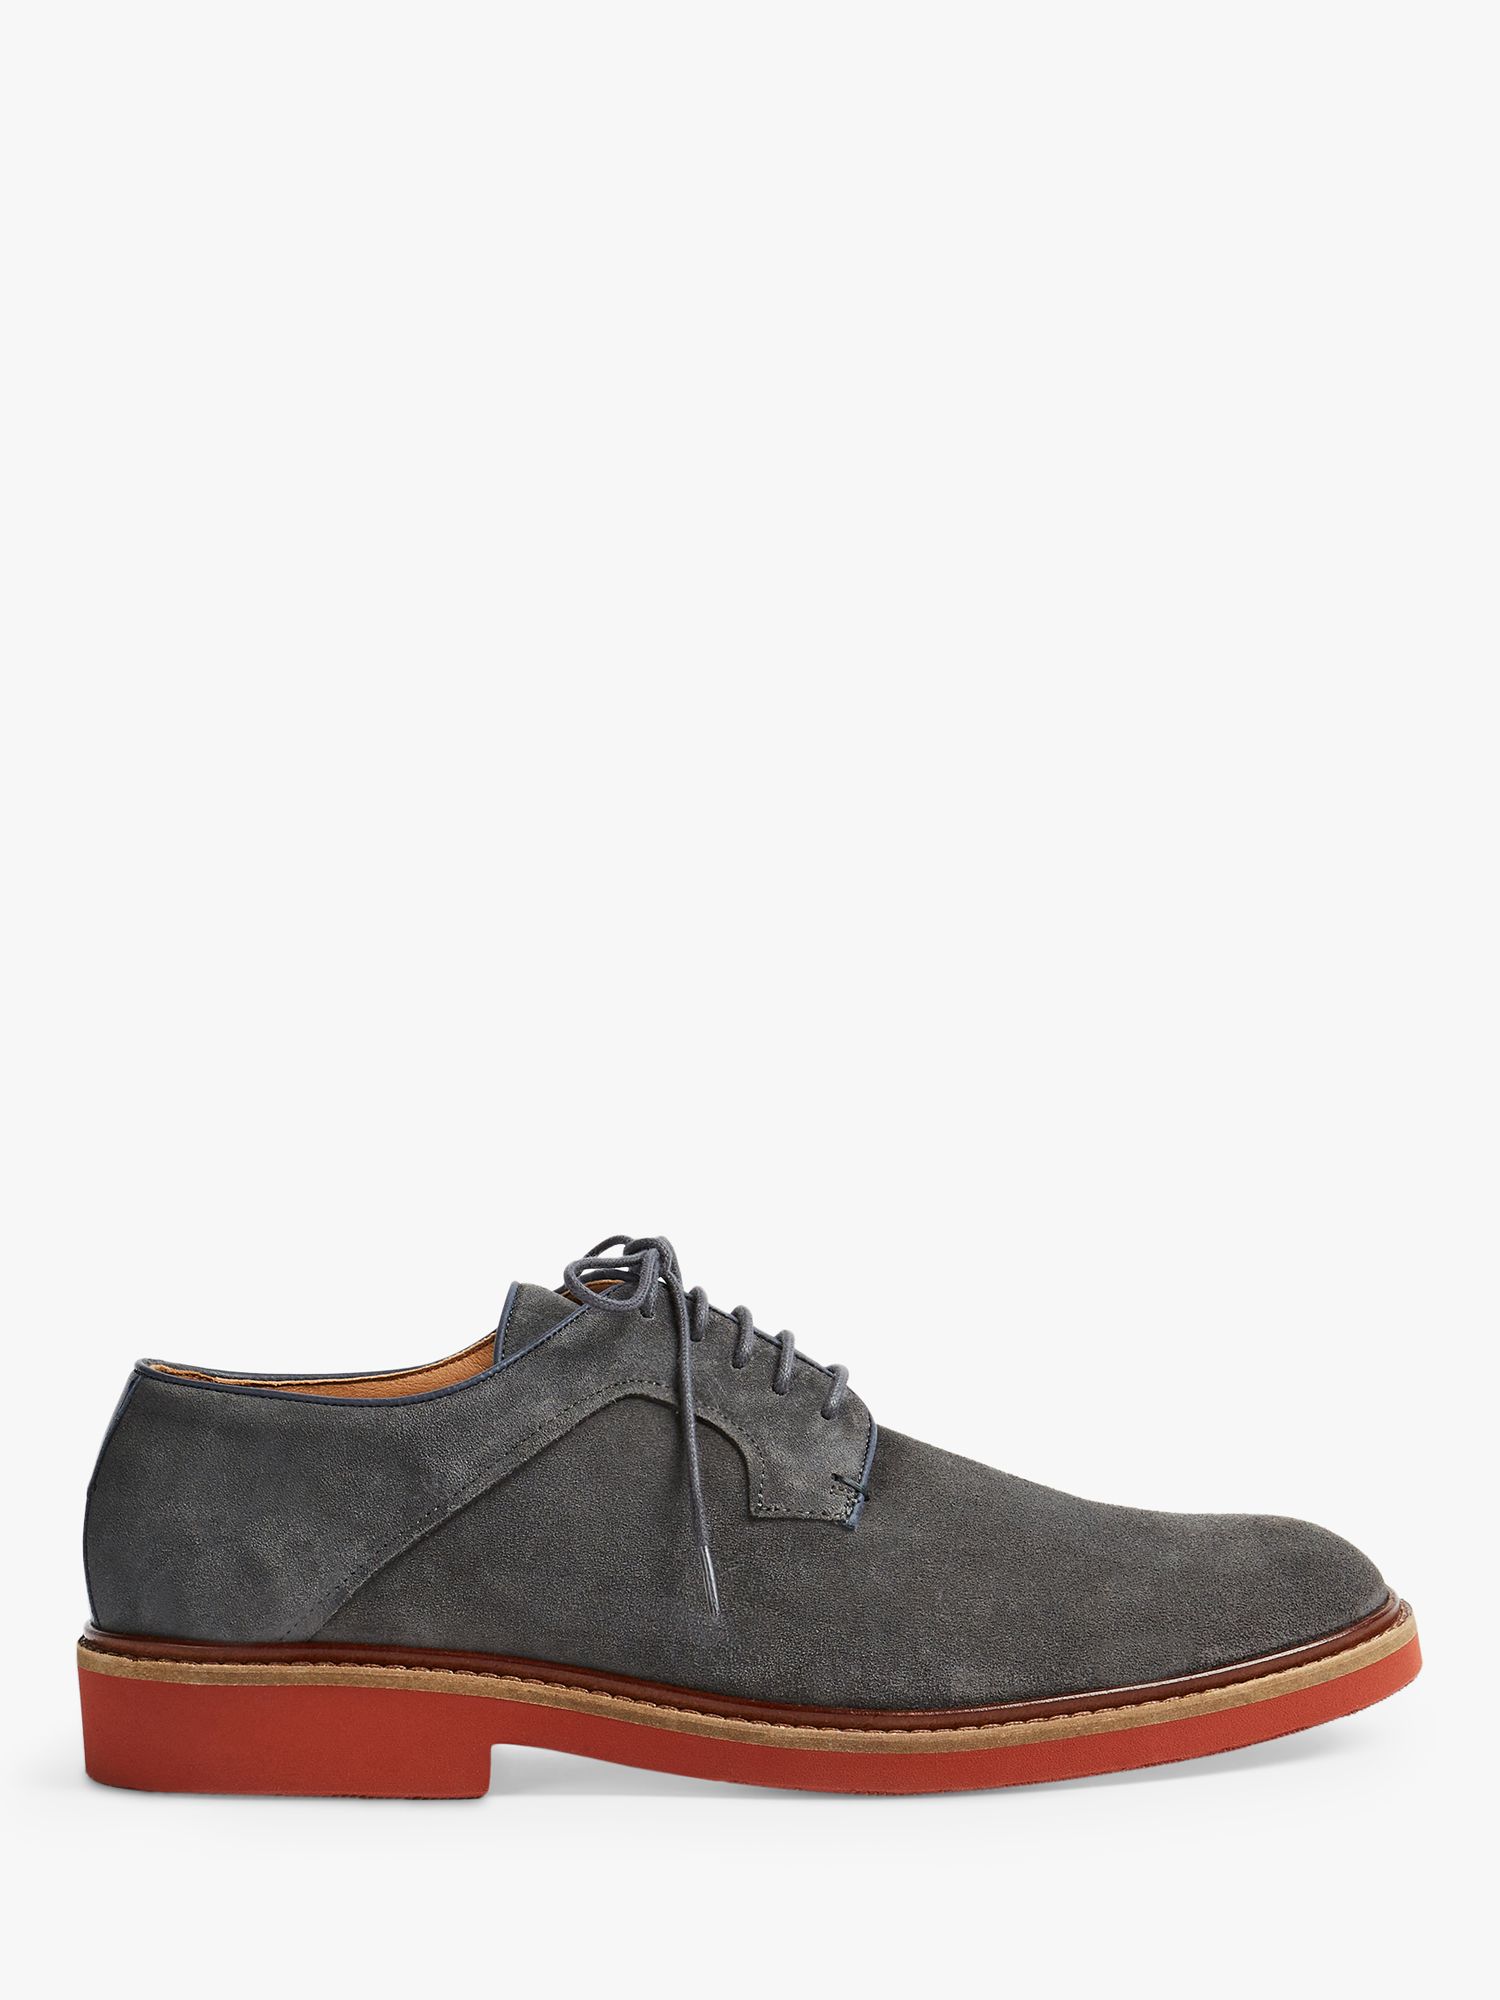 Ted Baker Wentol Smart Casual Derby Shoes, Grey Mid at John Lewis ...